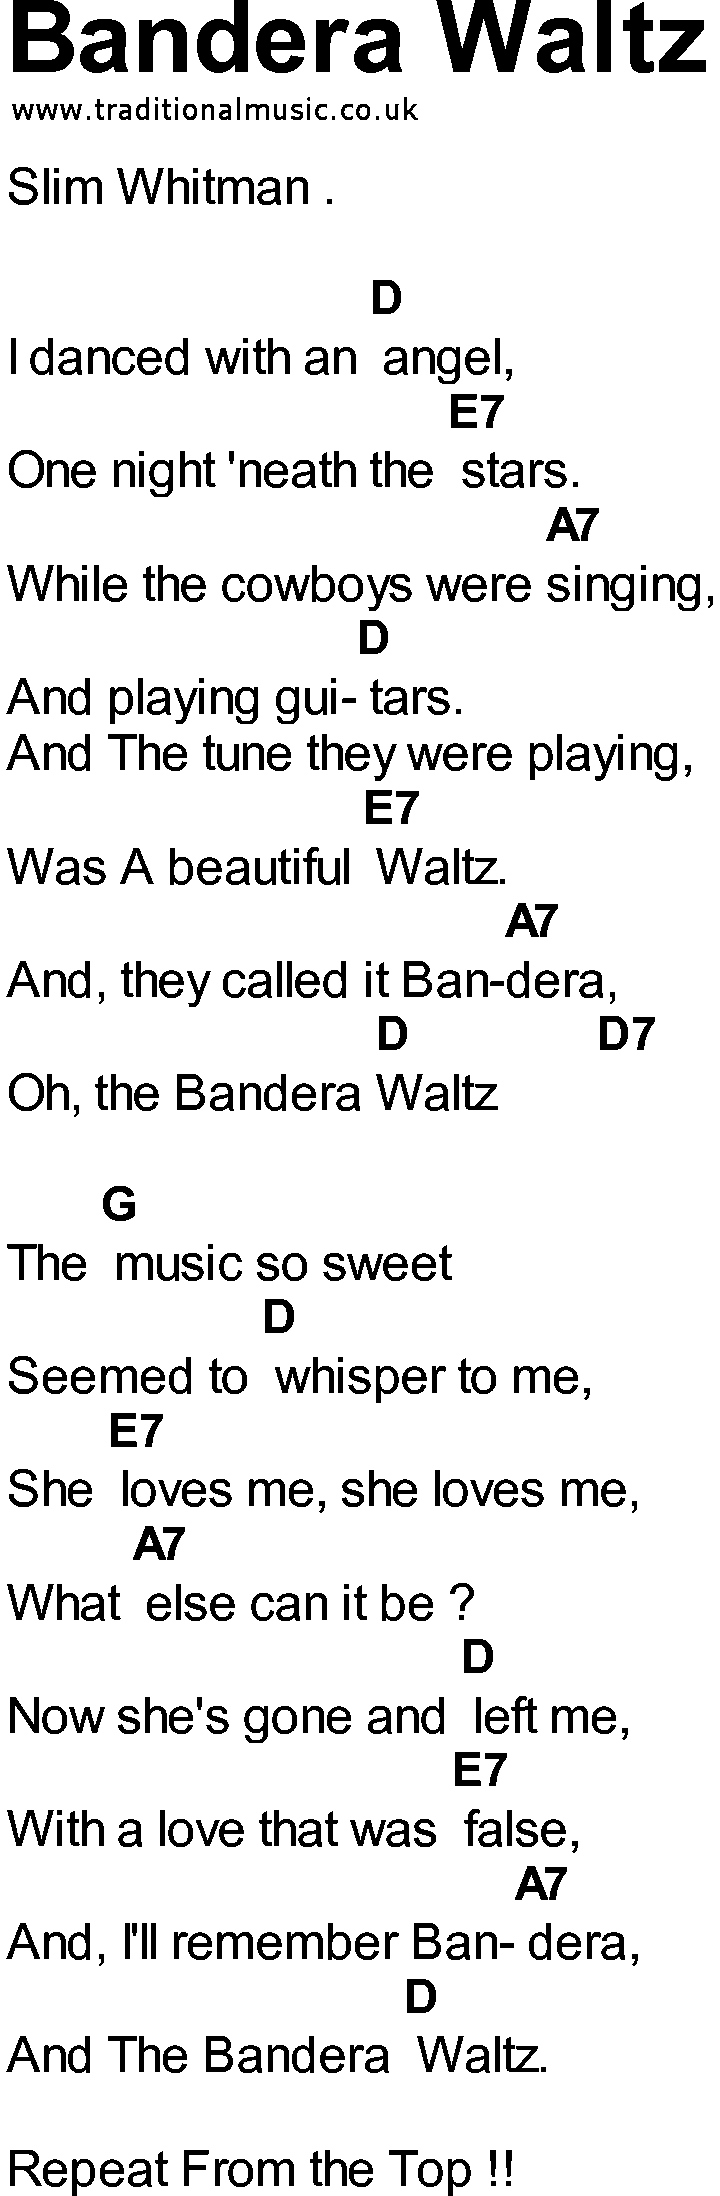 Bluegrass songs with chords - Bandera Waltz